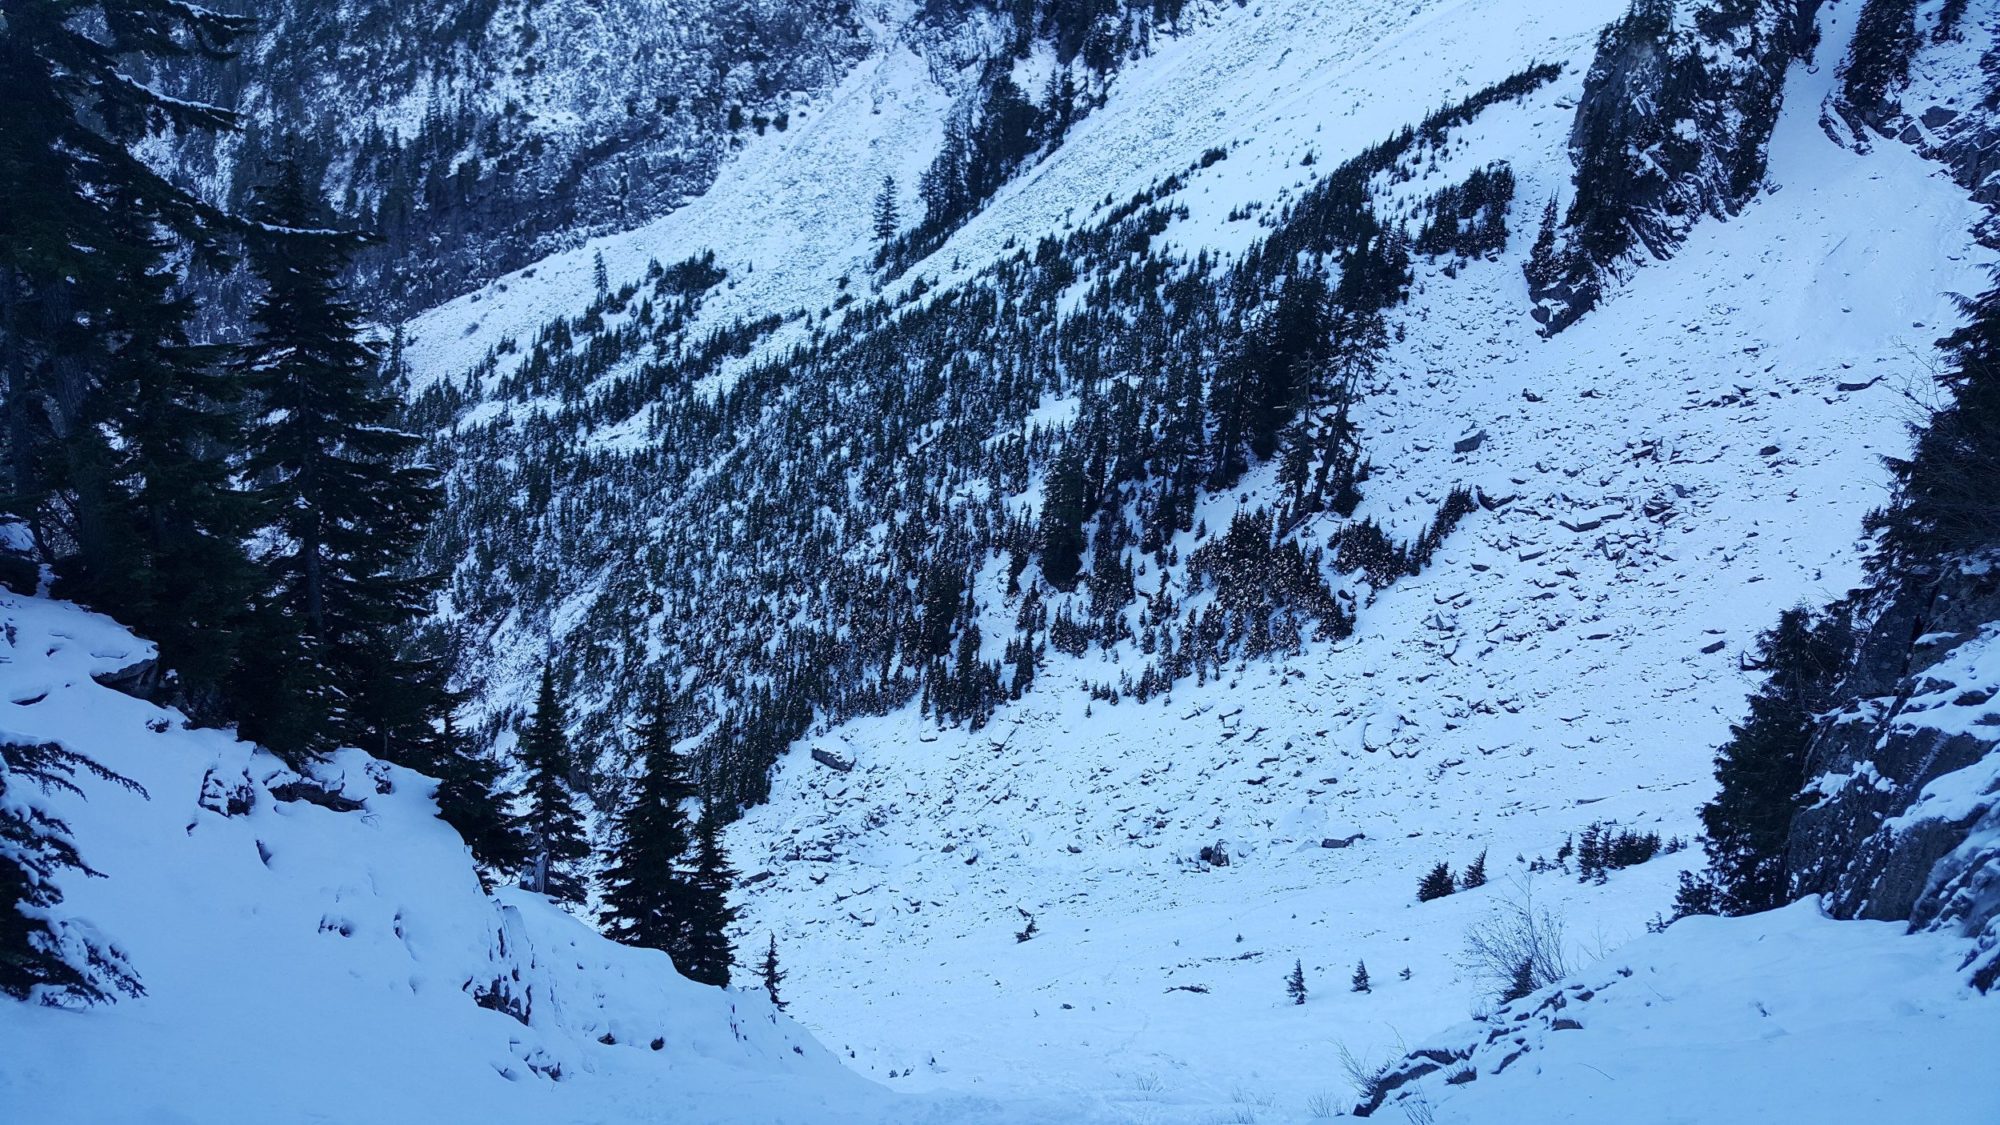 headlee pass during the winter covered in snow